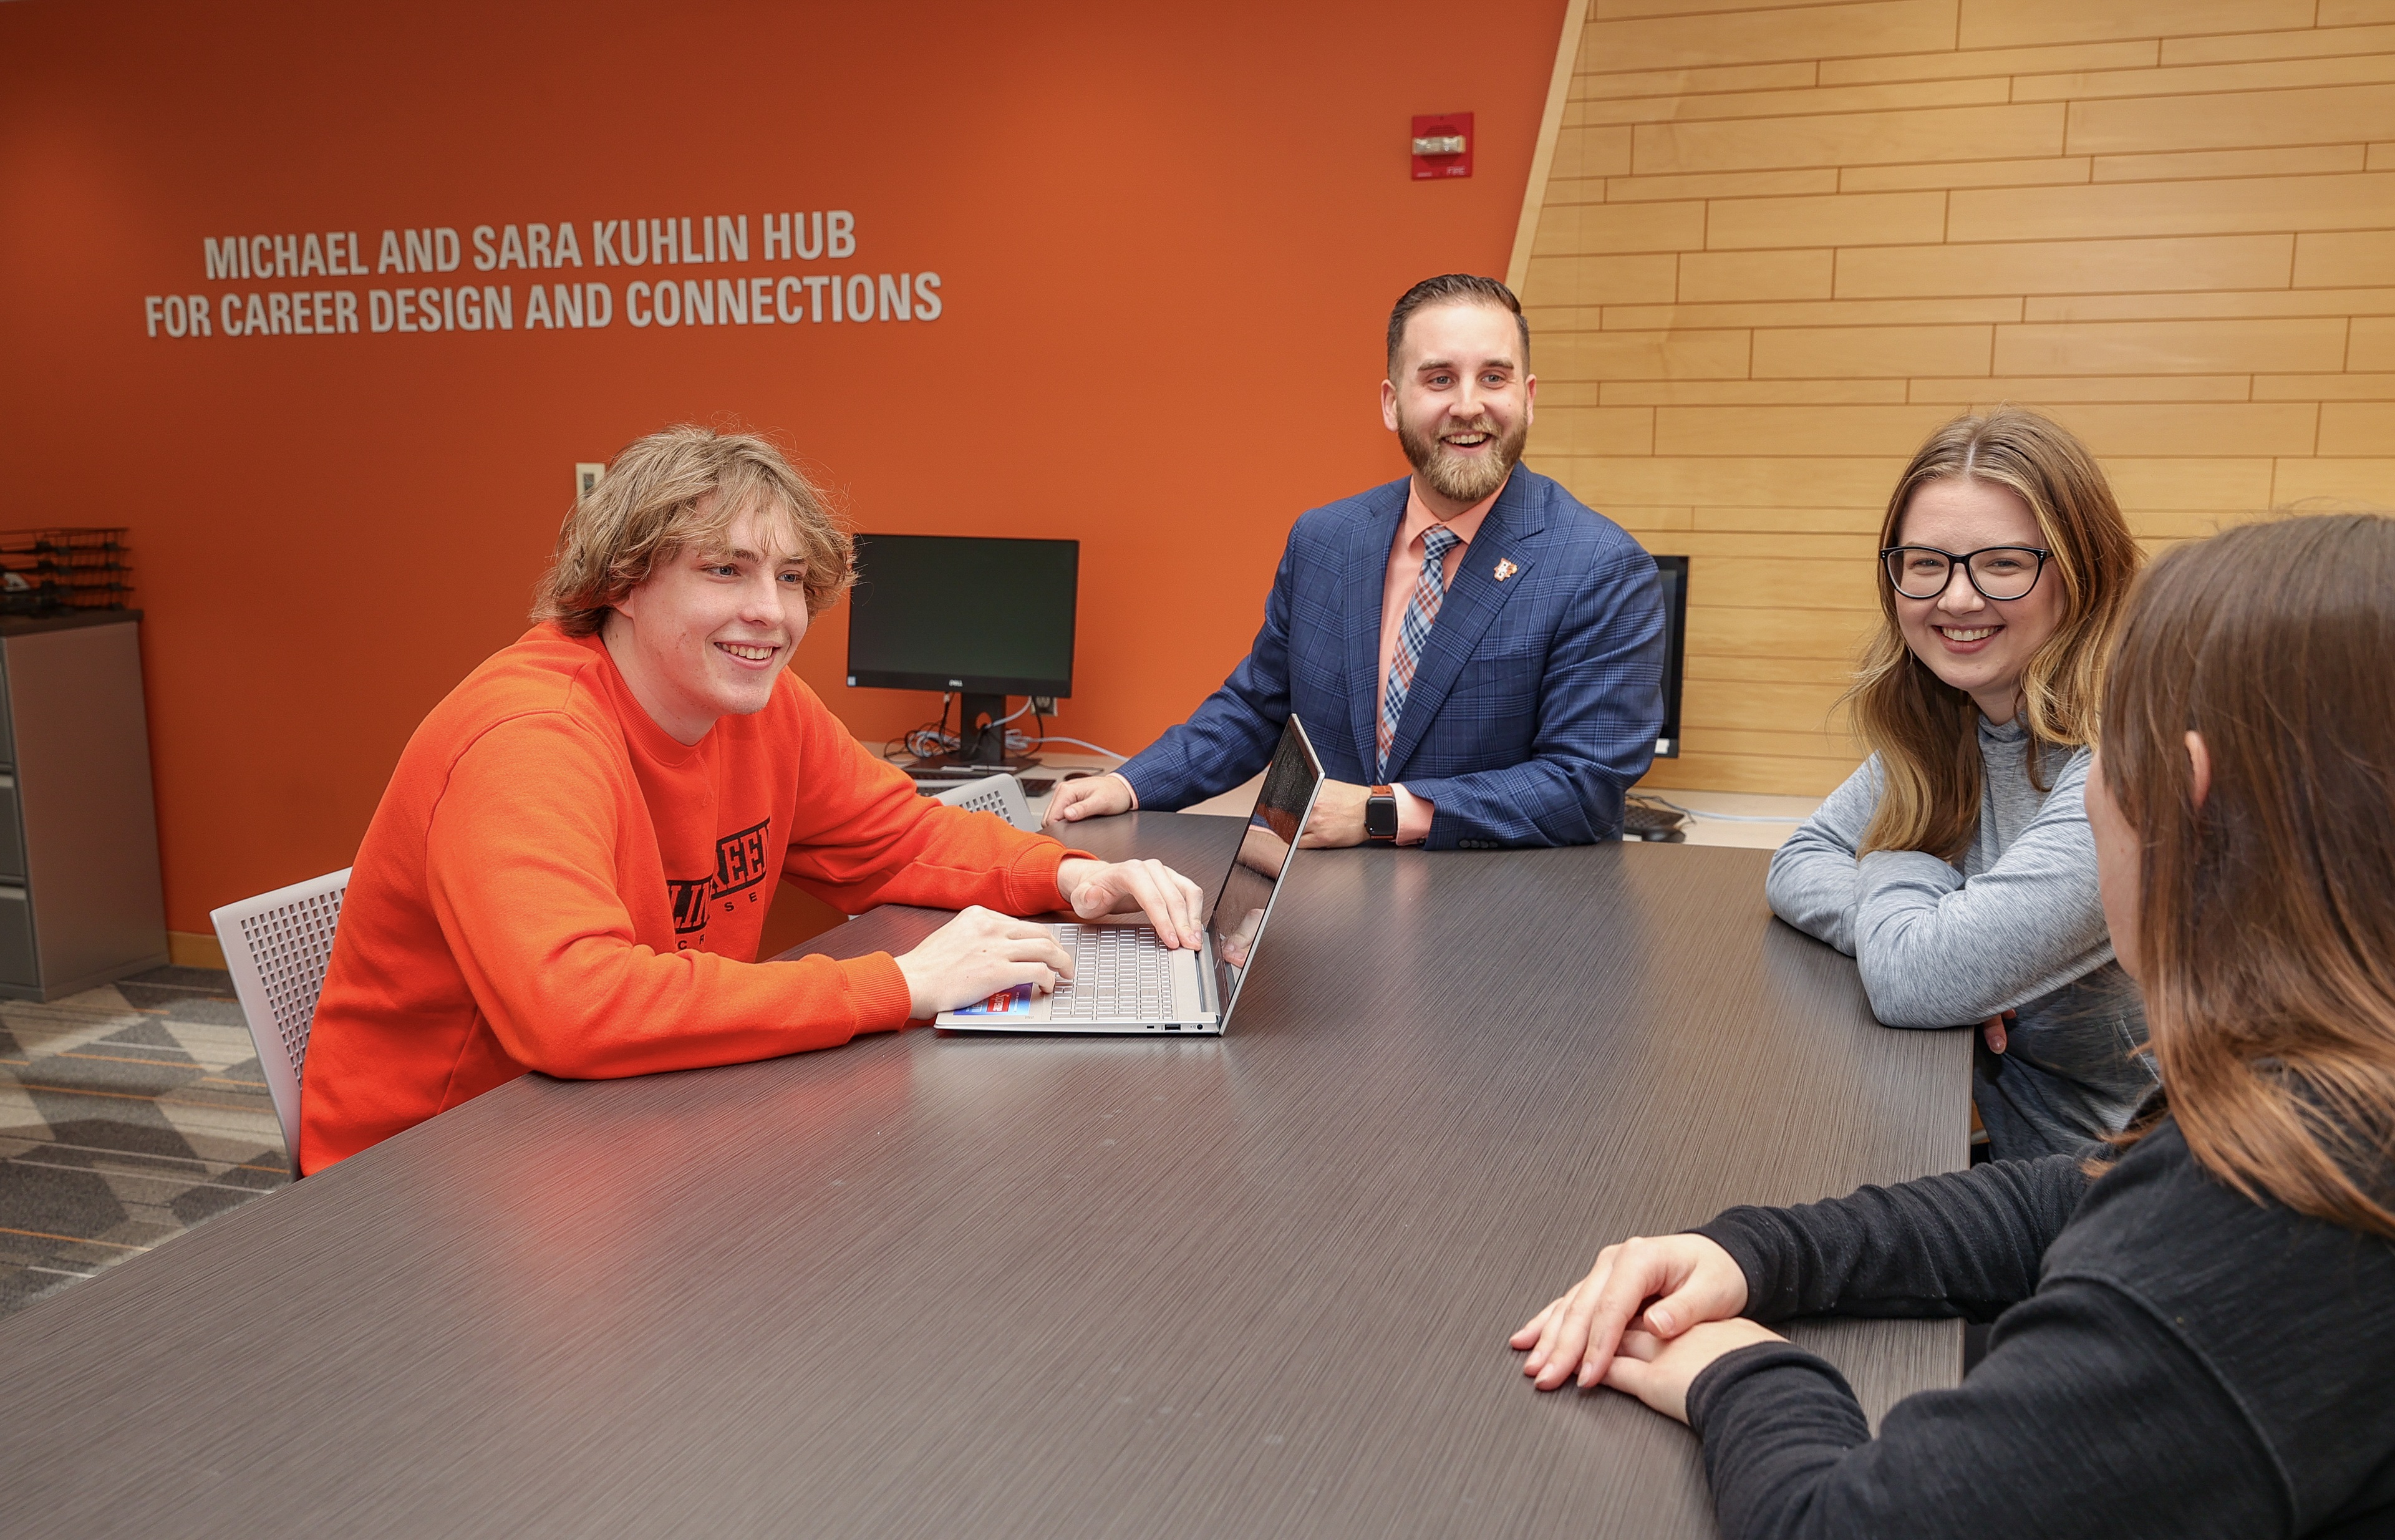 Steve Russell meets with students at the Kuhlin Hub for Career Design and Connections at BGSU.